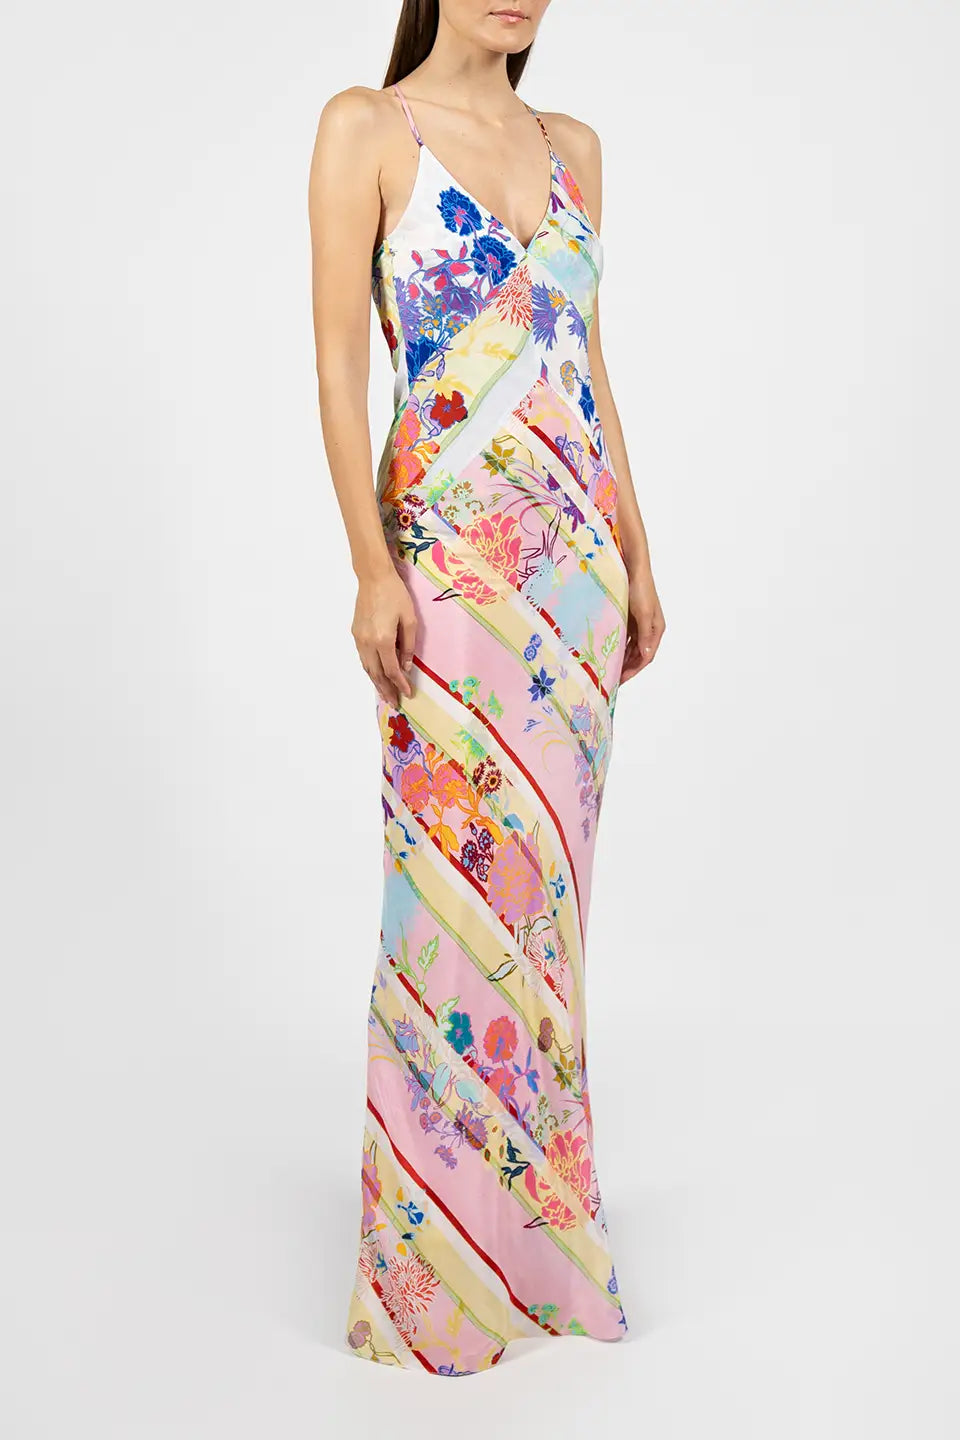 Designer White Maxi dresses, shop online with free delivery in UAE. Product gallery 2